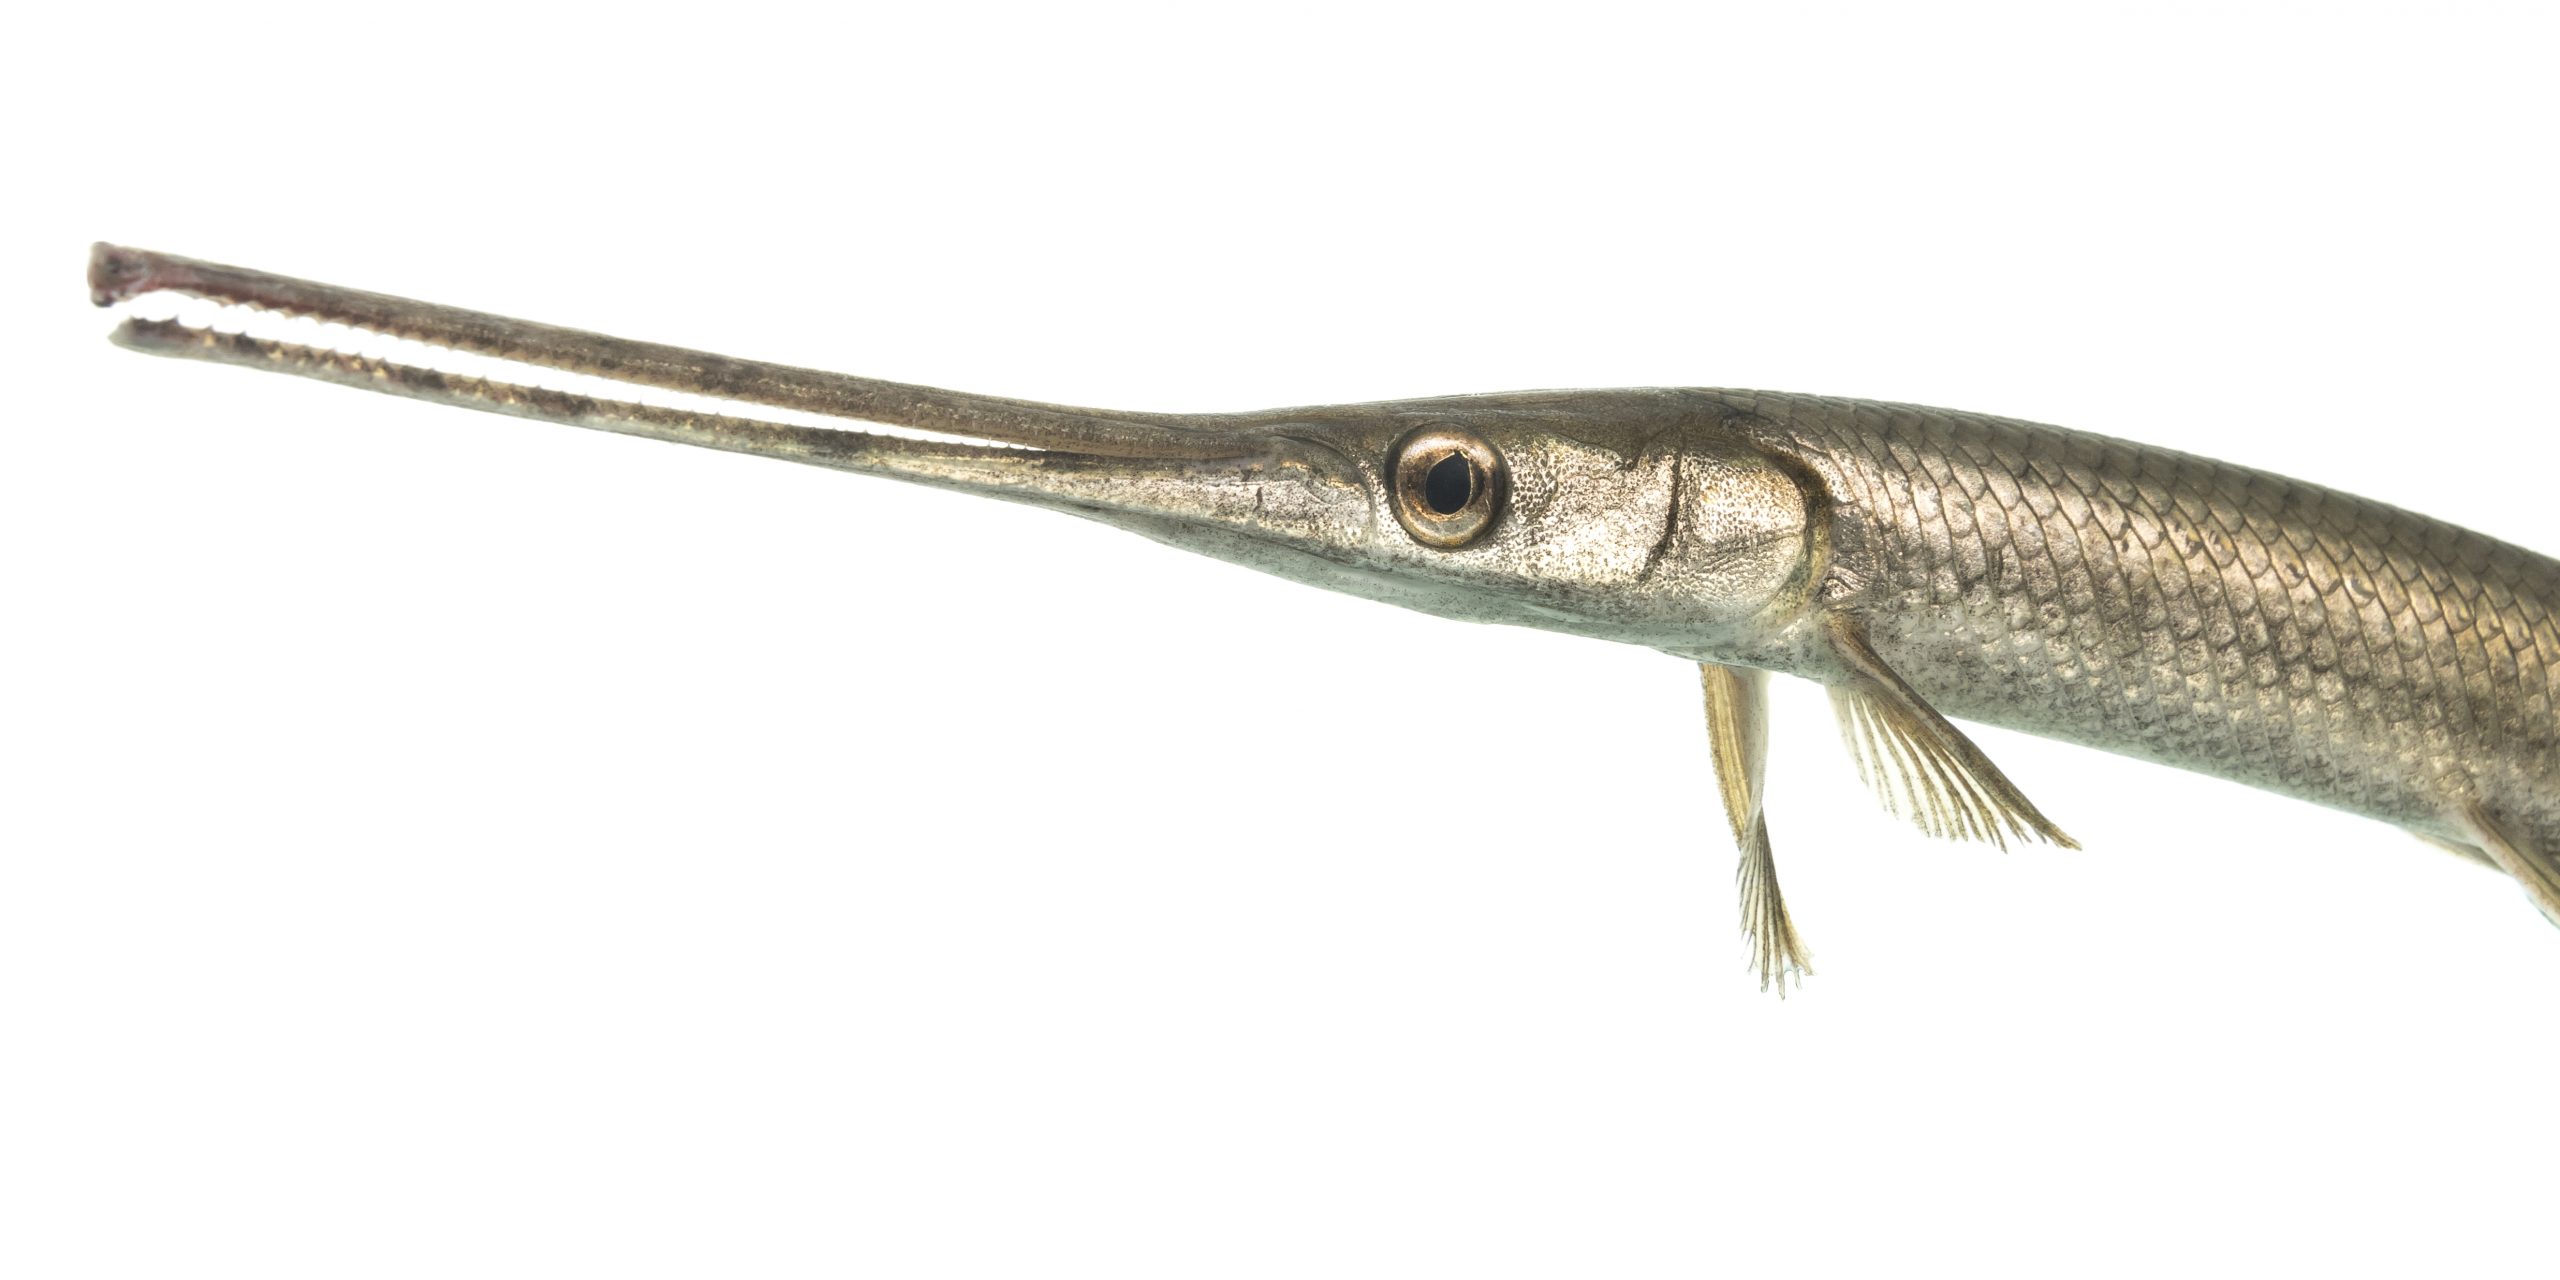 Close-up of front portion of fish with large eyeball and thin, long snout